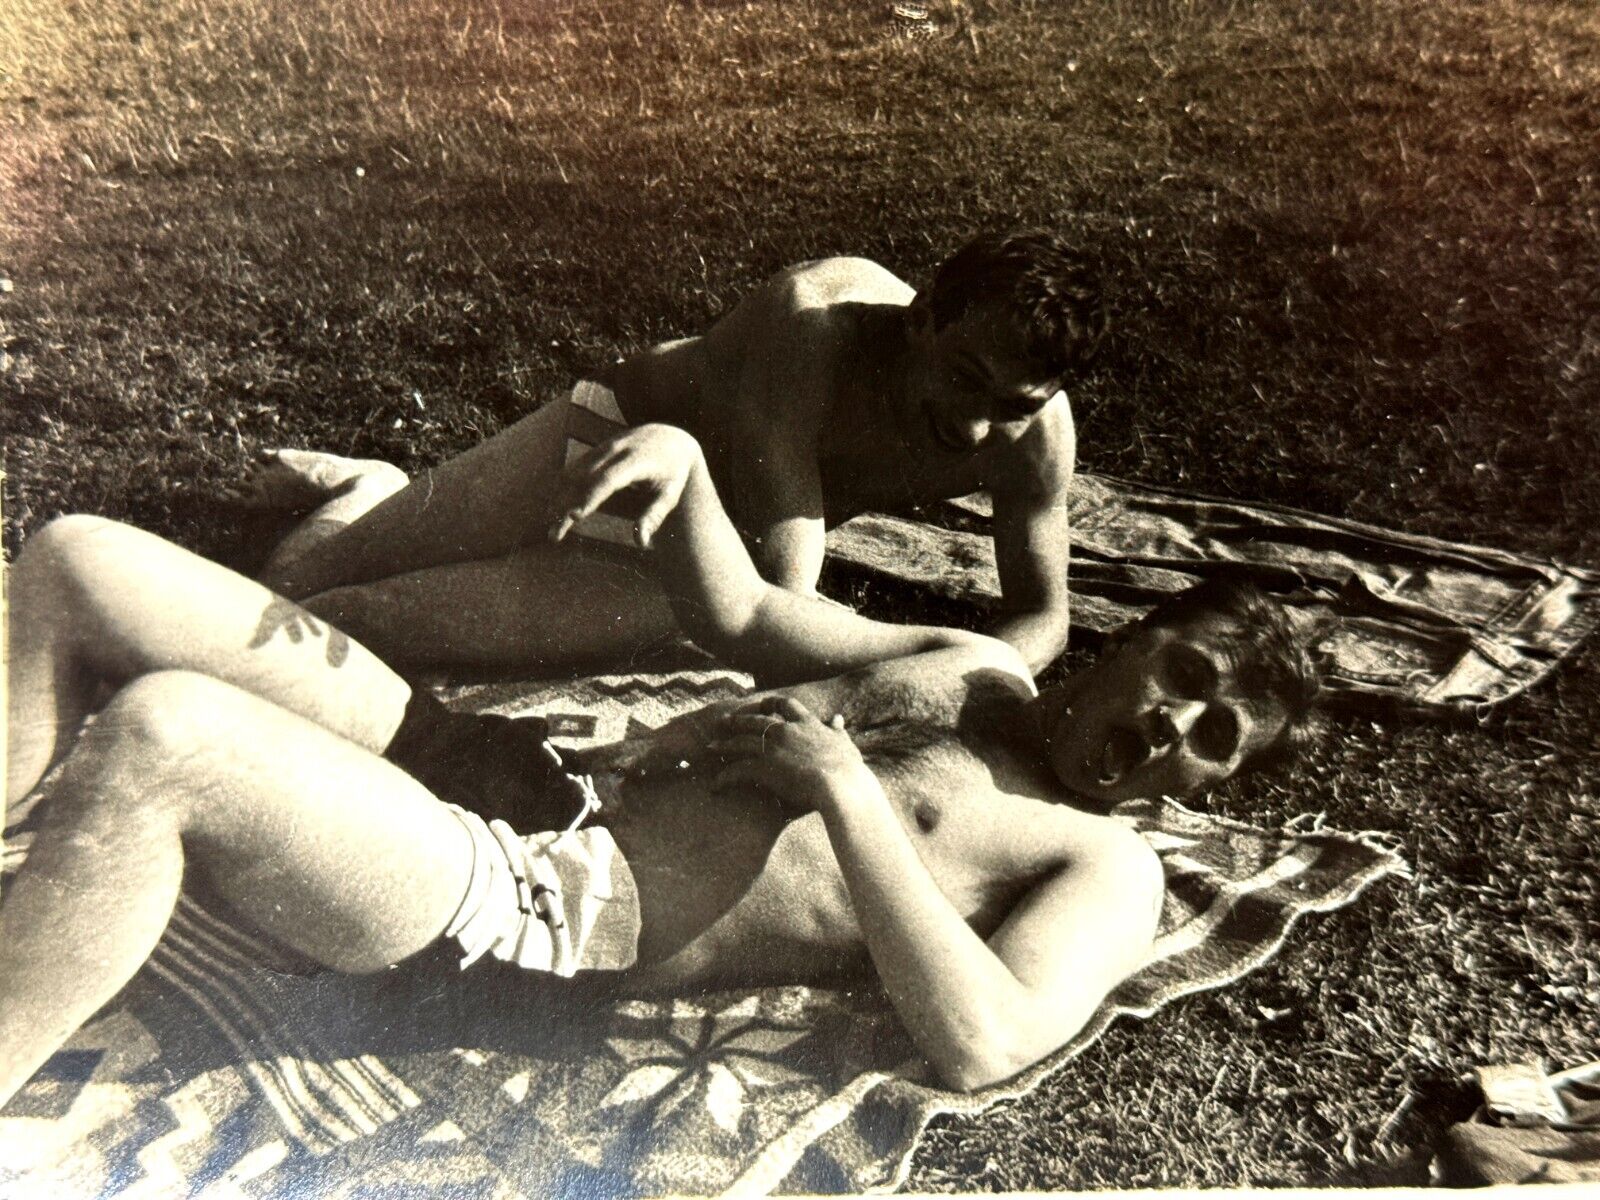 1970s Two Affectionate Shirtless Men Trunks Bulge Lying Gay int Vintage Photo